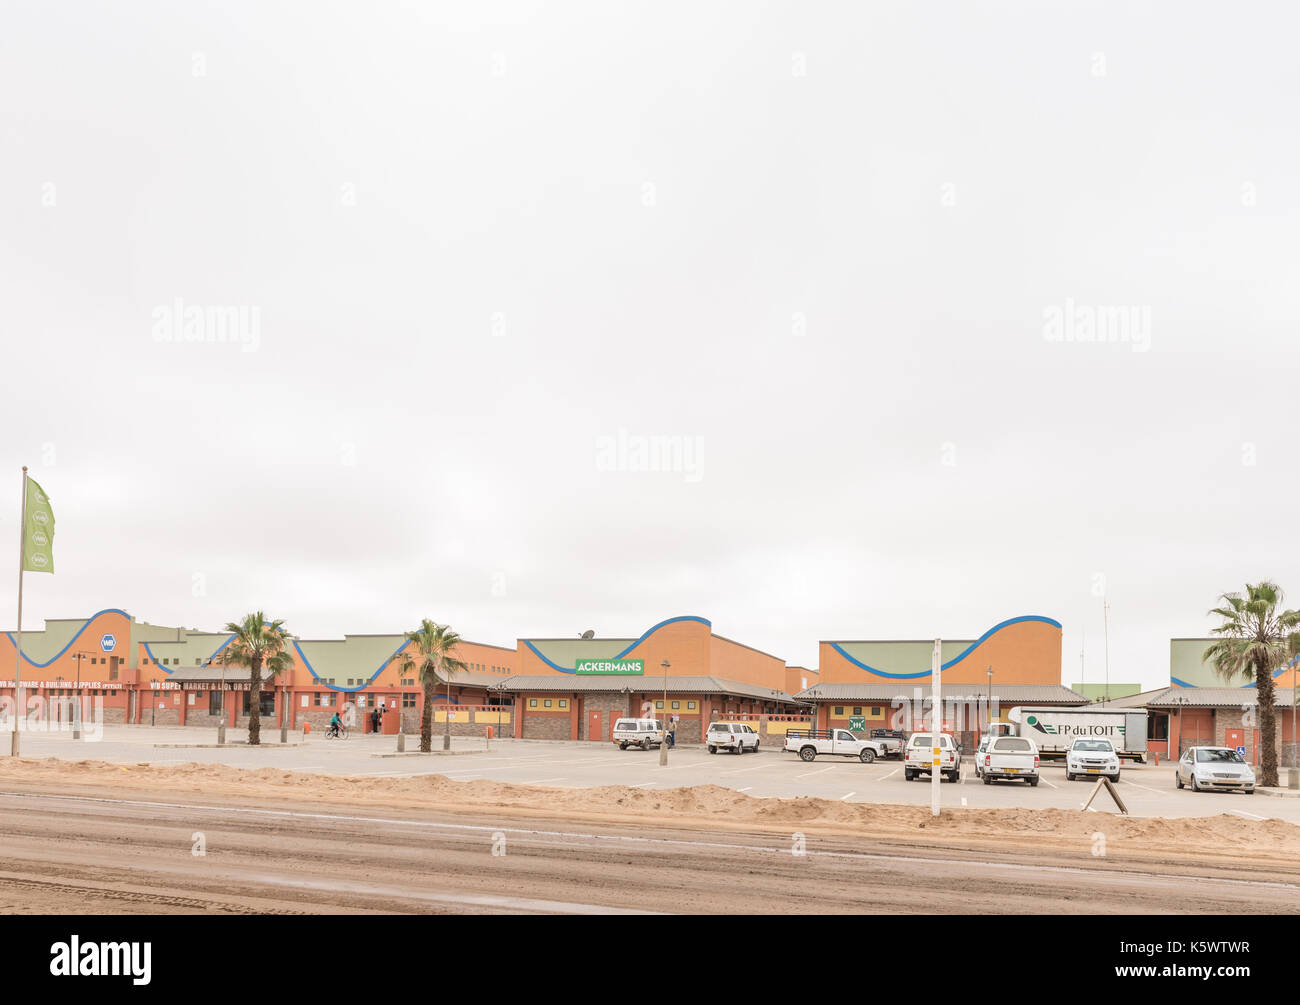 HENTIES BAY, NAMIBIA - JUNE 29, 2017: A street scene with a shopping centre in Henties Bay, a holiday town on the Skeleton Coast of Namibia Stock Photo